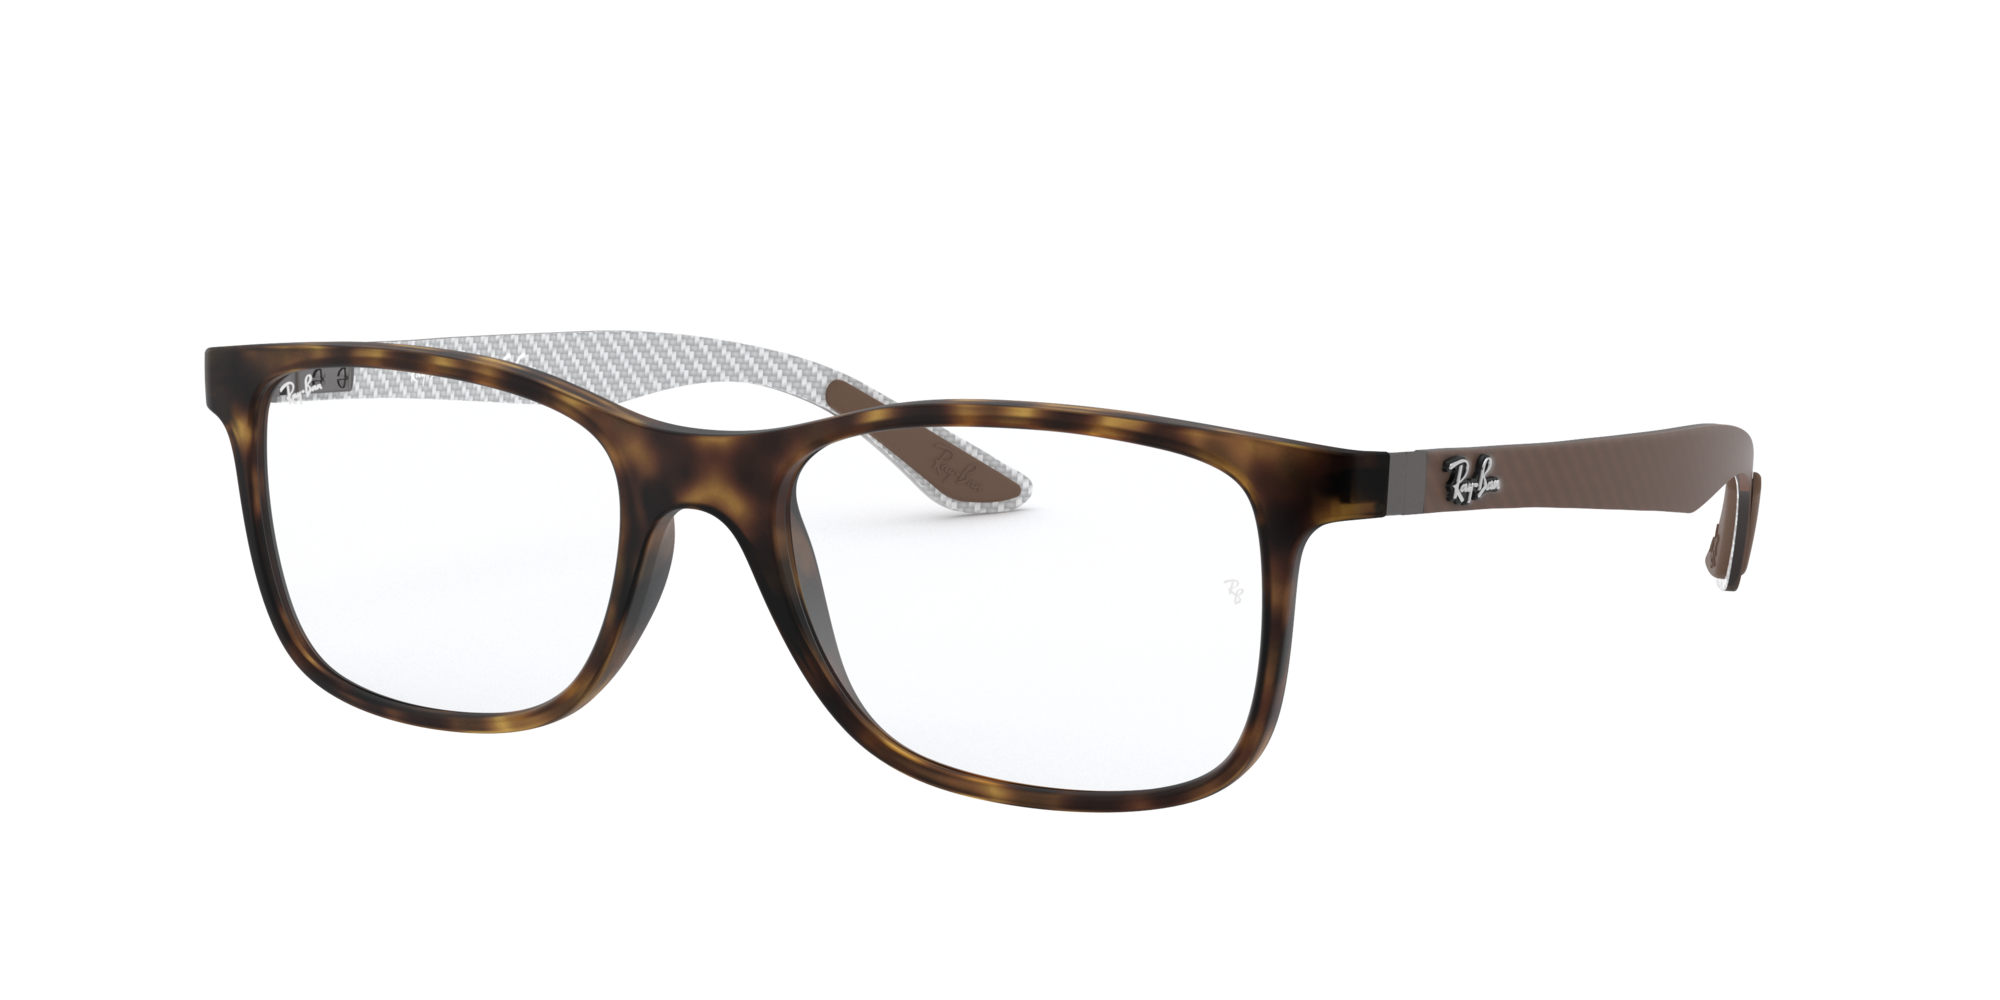 Ray-Ban 0RX8903 Glasses in Tortoise 